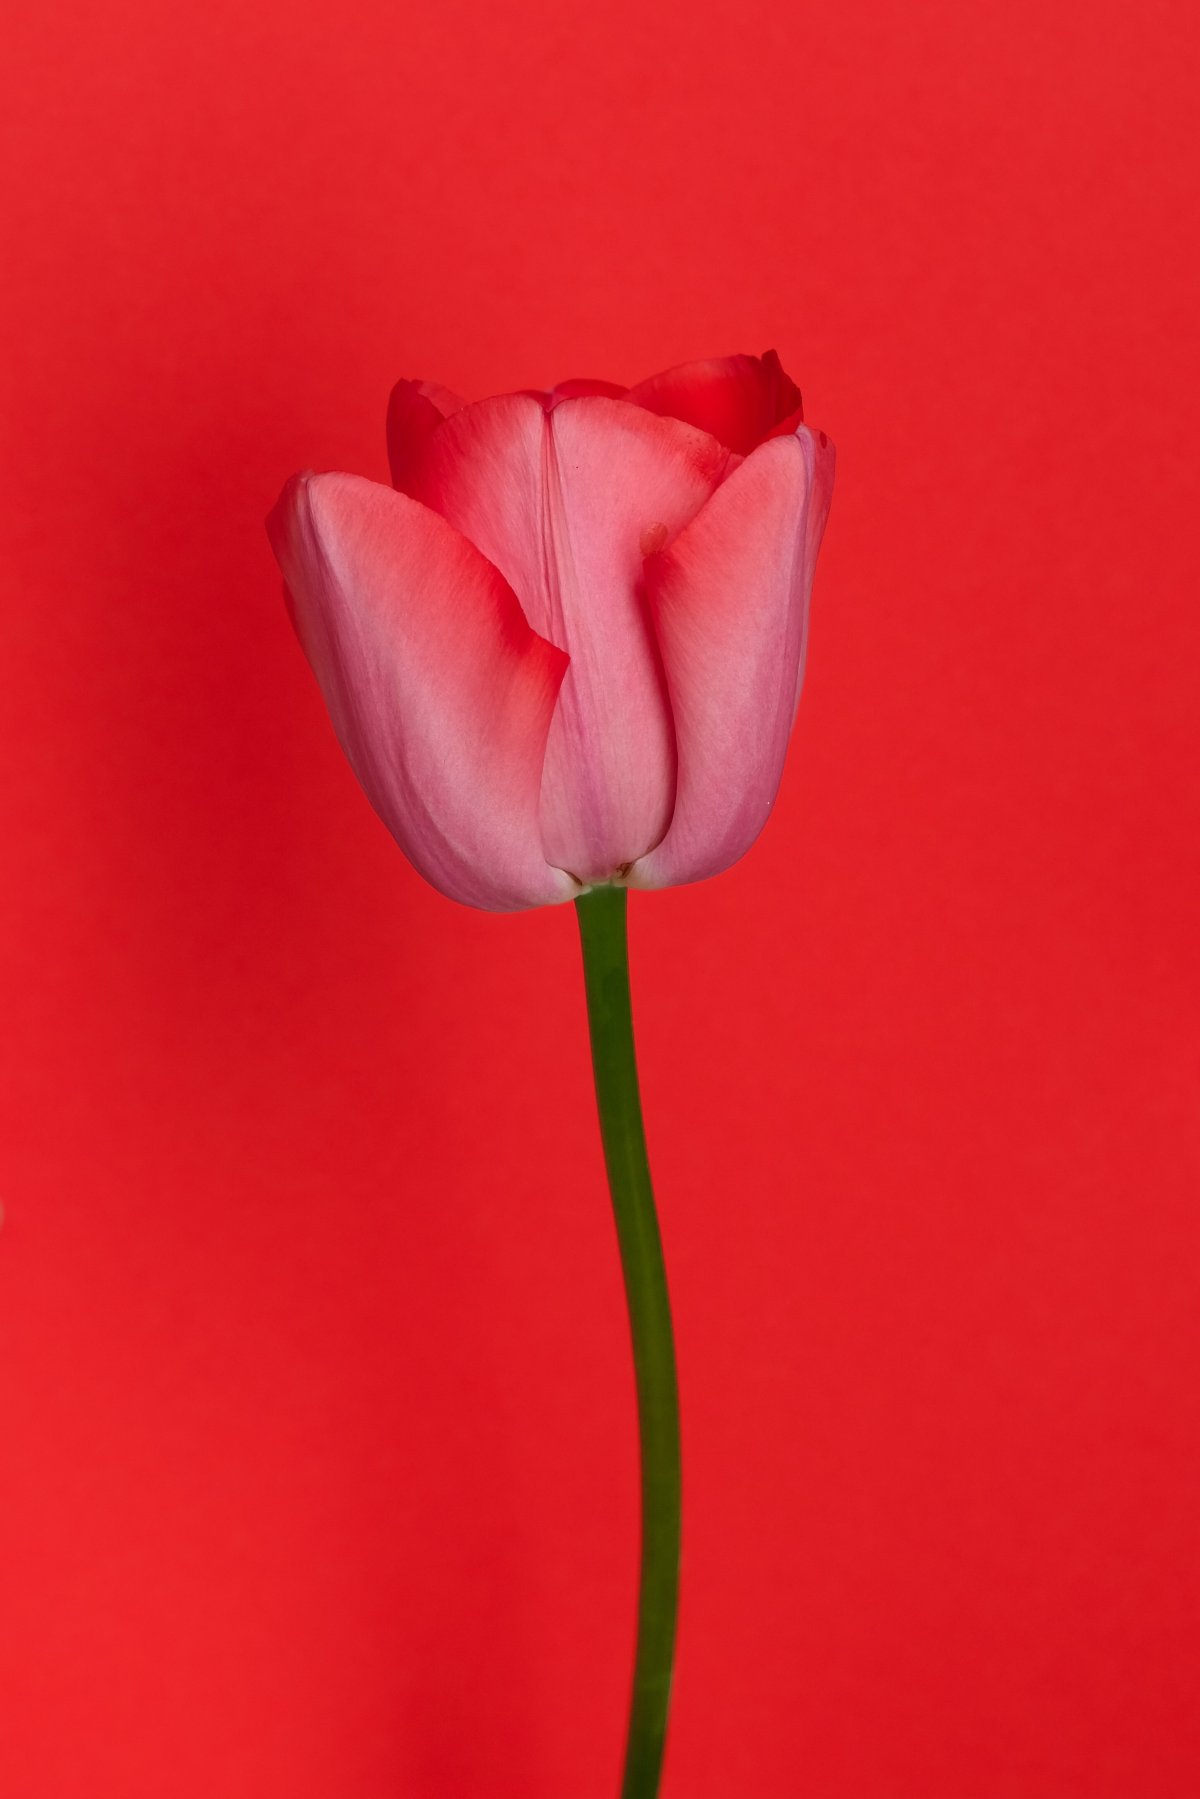 A red tulip flower picture